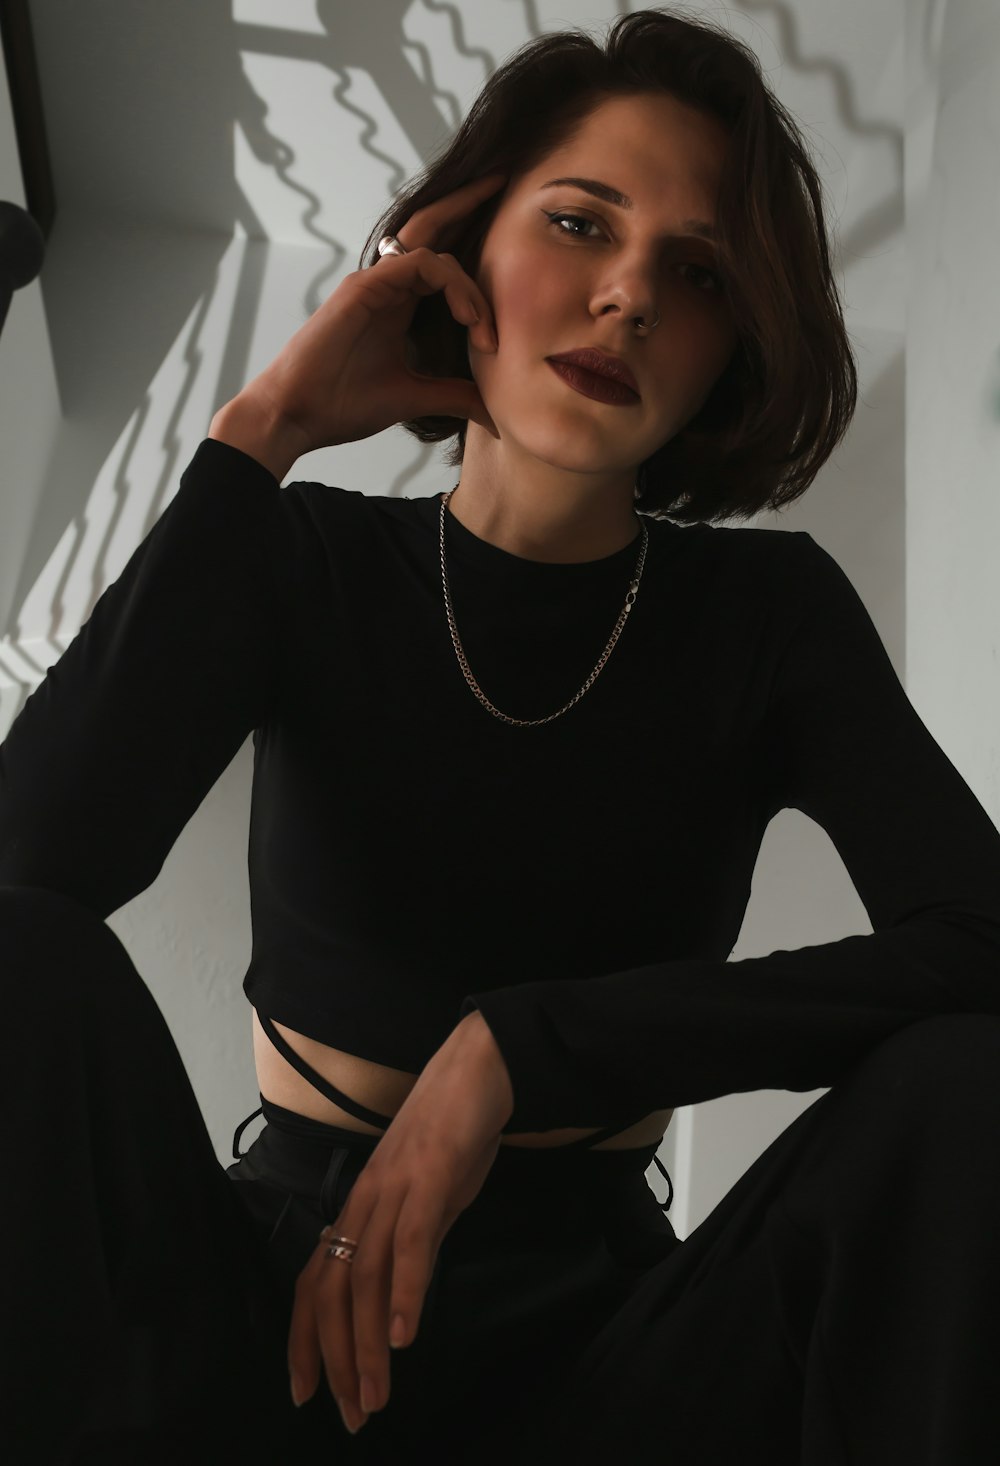 a woman in a black shirt and black pants